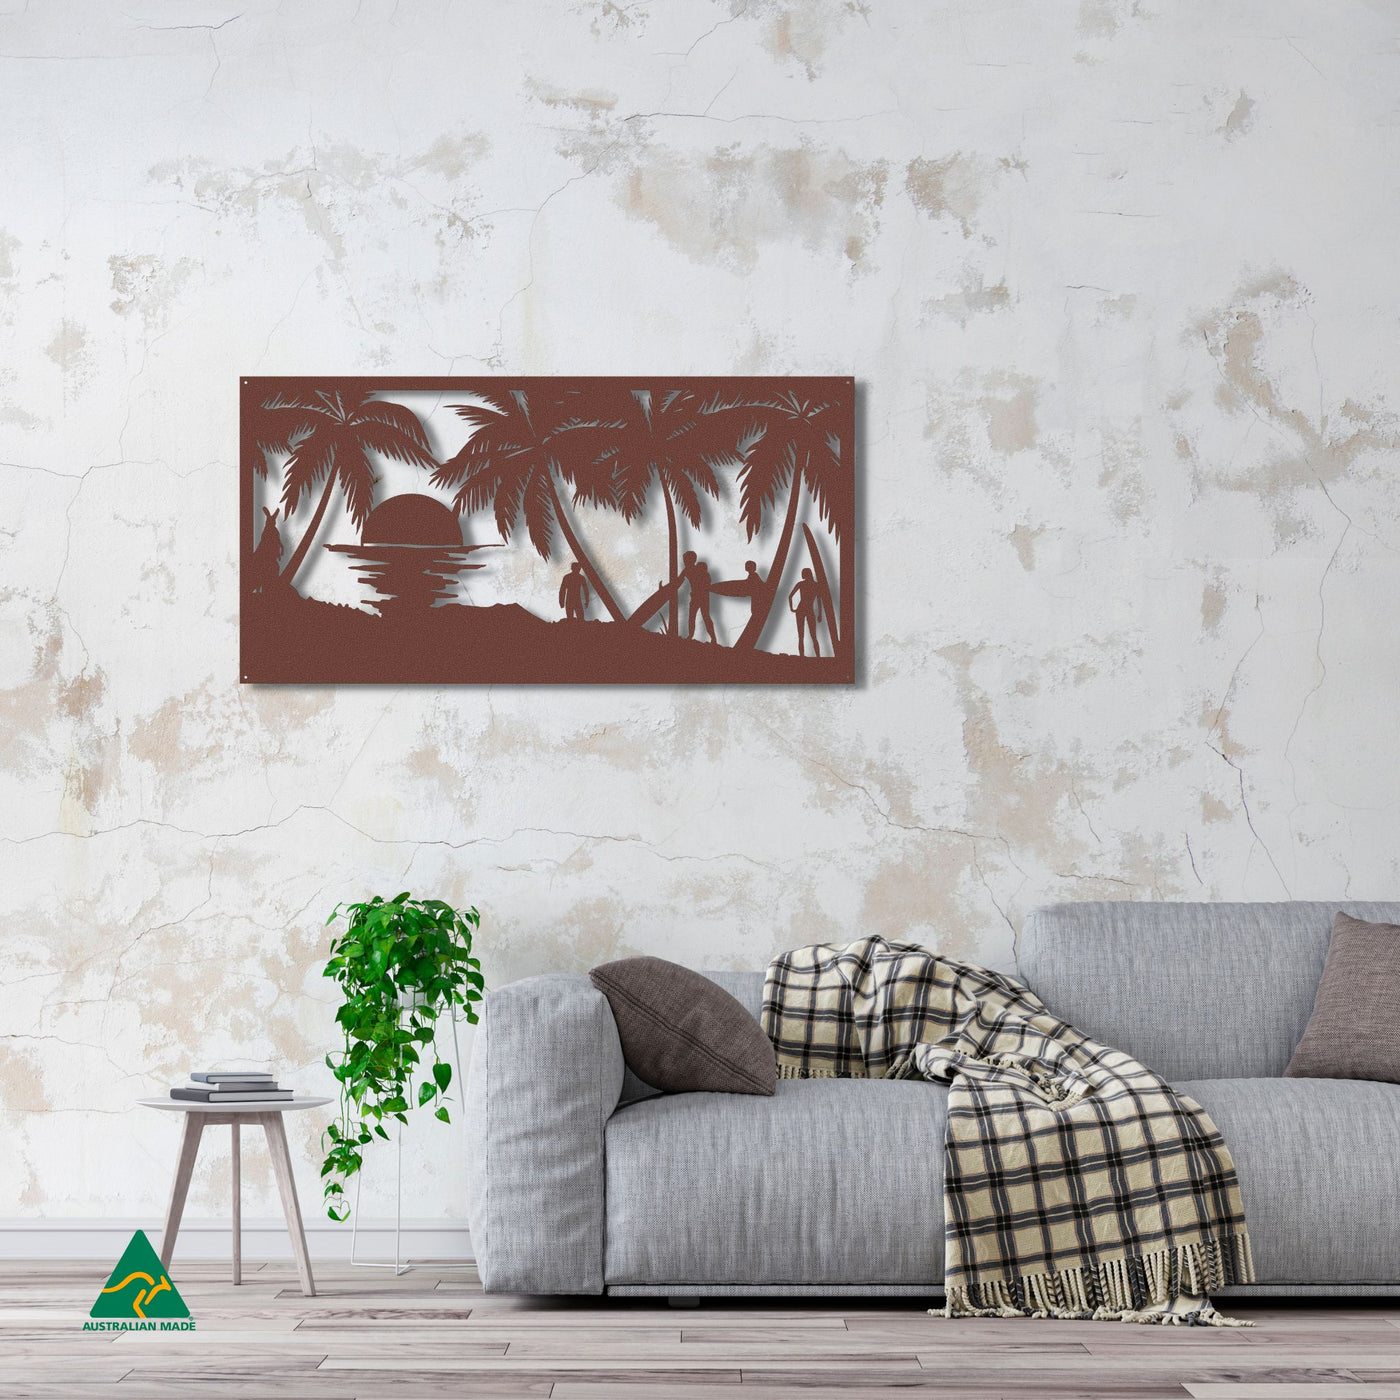 Surf’s Up Metal Wall Art Staged Image | Rust Patina